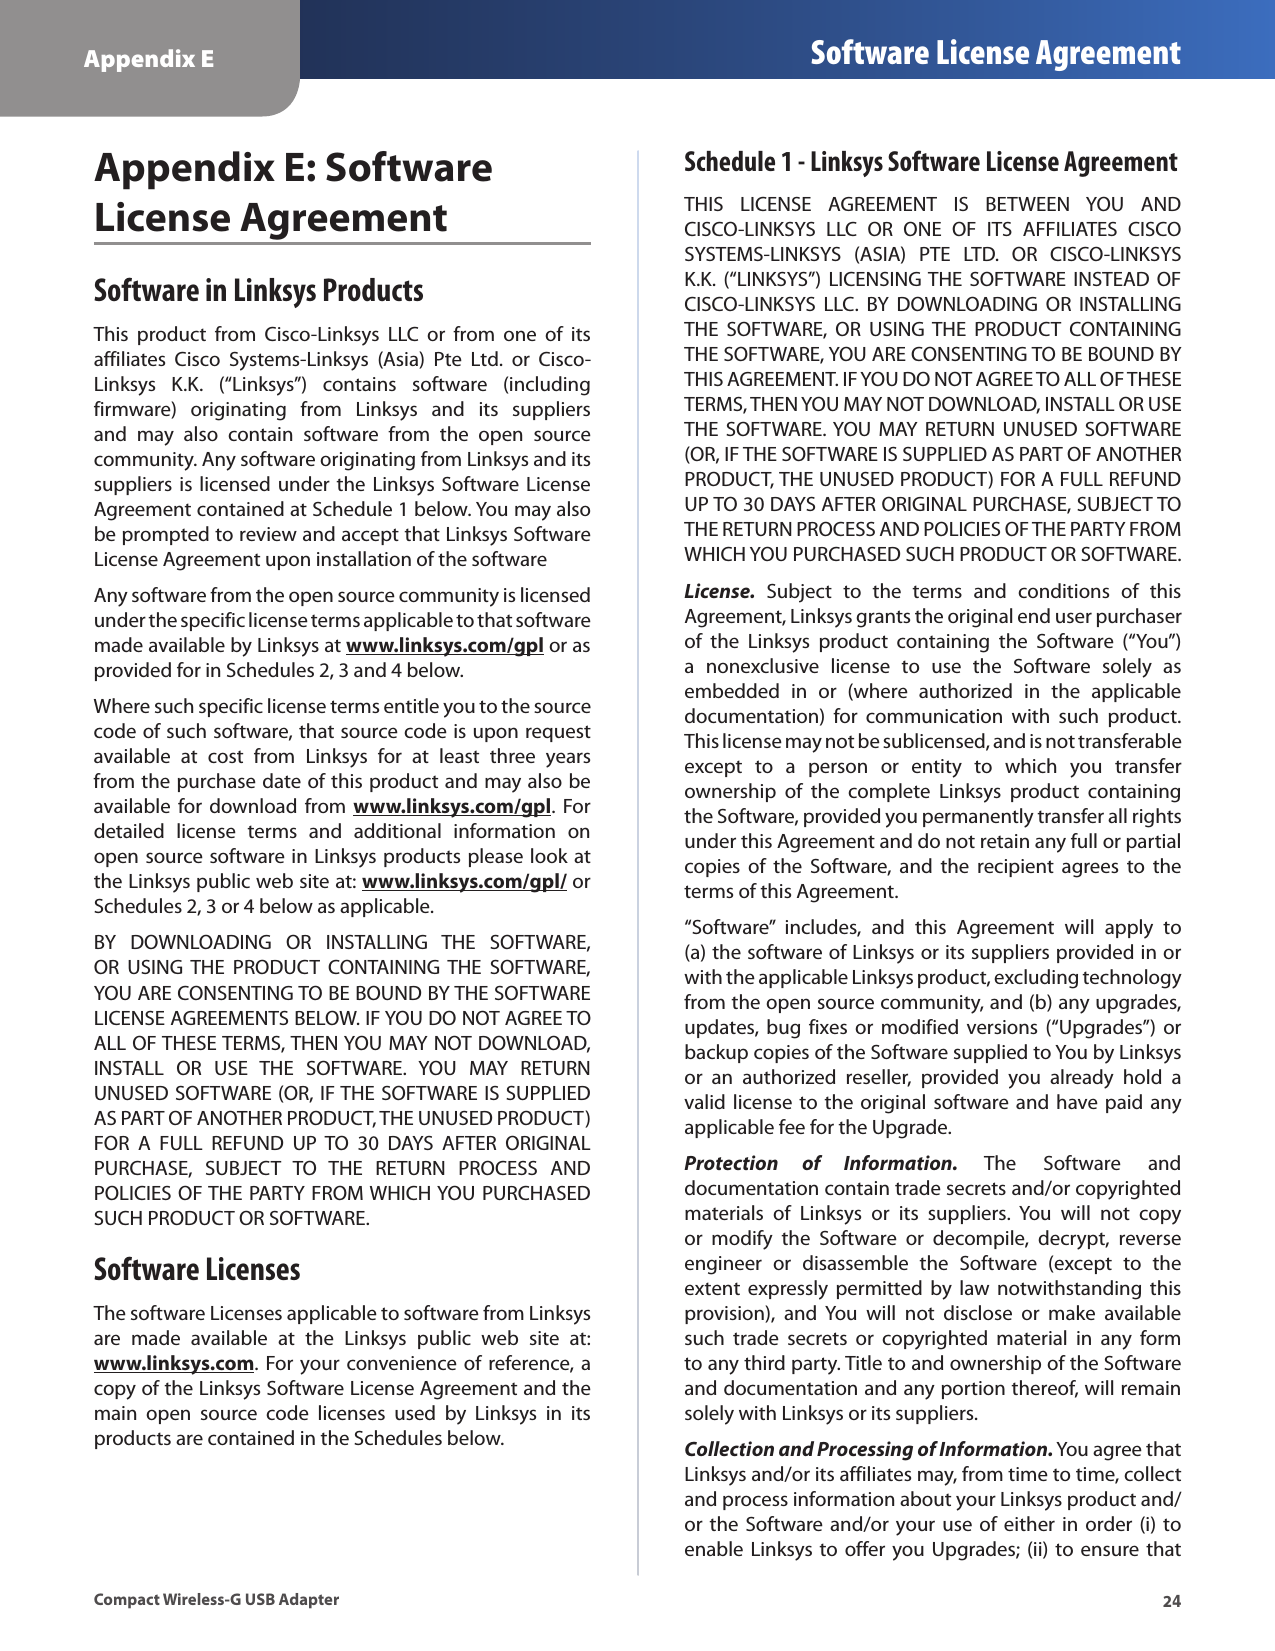 24Appendix E Software License AgreementCompact Wireless-G USB AdapterAppendix E: Software License AgreementSoftware in Linksys ProductsThis  product  from  Cisco-Linksys  LLC  or  from  one  of  its affiliates  Cisco  Systems-Linksys  (Asia)  Pte  Ltd.  or  Cisco-Linksys  K.K.  (“Linksys”)  contains  software  (including firmware)  originating  from  Linksys  and  its  suppliers and  may  also  contain  software  from  the  open  source community. Any software originating from Linksys and its suppliers is licensed under the  Linksys  Software  License Agreement contained at Schedule 1 below. You may also be prompted to review and accept that Linksys Software License Agreement upon installation of the softwareAny software from the open source community is licensed under the specific license terms applicable to that software made available by Linksys at www.linksys.com/gpl or as provided for in Schedules 2, 3 and 4 below.Where such specific license terms entitle you to the source code of such software, that source code is upon request available  at  cost  from  Linksys  for  at  least  three  years from the purchase date of this product and may also be available for  download from www.linksys.com/gpl.  For detailed  license  terms  and  additional  information  on open source software in Linksys products please look at the Linksys public web site at: www.linksys.com/gpl/ or Schedules 2, 3 or 4 below as applicable.BY  DOWNLOADING  OR  INSTALLING  THE  SOFTWARE, OR  USING  THE  PRODUCT  CONTAINING  THE  SOFTWARE, YOU ARE CONSENTING TO BE BOUND BY THE SOFTWARE LICENSE AGREEMENTS BELOW. IF YOU DO NOT AGREE TO ALL OF THESE TERMS, THEN YOU MAY NOT DOWNLOAD, INSTALL  OR  USE  THE  SOFTWARE.  YOU  MAY  RETURN UNUSED SOFTWARE (OR, IF THE SOFTWARE IS SUPPLIED AS PART OF ANOTHER PRODUCT, THE UNUSED PRODUCT) FOR  A  FULL  REFUND  UP  TO  30  DAYS  AFTER  ORIGINAL PURCHASE,  SUBJECT  TO  THE  RETURN  PROCESS  AND POLICIES OF THE PARTY FROM WHICH YOU PURCHASED SUCH PRODUCT OR SOFTWARE.Software LicensesThe software Licenses applicable to software from Linksys are  made  available  at  the  Linksys  public  web  site  at: www.linksys.com. For your  convenience of  reference, a copy of the Linksys Software License Agreement and the main  open  source  code  licenses  used  by  Linksys  in  its products are contained in the Schedules below.Schedule 1 - Linksys Software License AgreementTHIS  LICENSE  AGREEMENT  IS  BETWEEN  YOU  AND CISCO-LINKSYS  LLC  OR  ONE  OF  ITS  AFFILIATES  CISCO SYSTEMS-LINKSYS  (ASIA)  PTE  LTD.  OR  CISCO-LINKSYS K.K.  (“LINKSYS”) LICENSING THE  SOFTWARE INSTEAD  OF CISCO-LINKSYS  LLC.  BY  DOWNLOADING  OR  INSTALLING THE  SOFTWARE,  OR  USING THE  PRODUCT  CONTAINING THE SOFTWARE, YOU ARE CONSENTING TO BE BOUND BY THIS AGREEMENT. IF YOU DO NOT AGREE TO ALL OF THESE TERMS, THEN YOU MAY NOT DOWNLOAD, INSTALL OR USE THE  SOFTWARE. YOU MAY  RETURN  UNUSED  SOFTWARE (OR, IF THE SOFTWARE IS SUPPLIED AS PART OF ANOTHER PRODUCT, THE UNUSED PRODUCT) FOR A FULL REFUND UP TO 30 DAYS AFTER ORIGINAL PURCHASE, SUBJECT TO THE RETURN PROCESS AND POLICIES OF THE PARTY FROM WHICH YOU PURCHASED SUCH PRODUCT OR SOFTWARE.License.  Subject  to  the  terms  and  conditions  of  this Agreement, Linksys grants the original end user purchaser of  the  Linksys  product  containing  the  Software  (“You”) a  nonexclusive  license  to  use  the  Software  solely  as embedded  in  or  (where  authorized  in  the  applicable documentation)  for  communication  with  such  product. This license may not be sublicensed, and is not transferable except  to  a  person  or  entity  to  which  you  transfer ownership  of  the  complete  Linksys  product  containing the Software, provided you permanently transfer all rights under this Agreement and do not retain any full or partial copies  of  the  Software,  and  the  recipient  agrees  to  the terms of this Agreement.“Software”  includes,  and  this  Agreement  will  apply  to (a) the software of Linksys or its suppliers provided in or with the applicable Linksys product, excluding technology from the open source community, and (b) any upgrades, updates, bug  fixes or  modified  versions  (“Upgrades”) or backup copies of the Software supplied to You by Linksys or  an  authorized  reseller,  provided  you  already  hold  a valid license to the original  software and  have paid any applicable fee for the Upgrade.Protection  of  Information.  The  Software  and documentation contain trade secrets and/or copyrighted materials  of  Linksys  or  its  suppliers.  You  will  not  copy or  modify  the  Software  or  decompile,  decrypt,  reverse engineer  or  disassemble  the  Software  (except  to  the extent  expressly  permitted  by  law  notwithstanding  this provision),  and  You  will  not  disclose  or  make  available such  trade  secrets  or  copyrighted  material  in  any  form to any third party. Title to and ownership of the Software and documentation and any portion thereof, will remain solely with Linksys or its suppliers.Collection and Processing of Information. You agree that Linksys and/or its affiliates may, from time to time, collect and process information about your Linksys product and/or the  Software  and/or  your use  of either  in order (i) to enable Linksys to offer you  Upgrades; (ii)  to  ensure that 